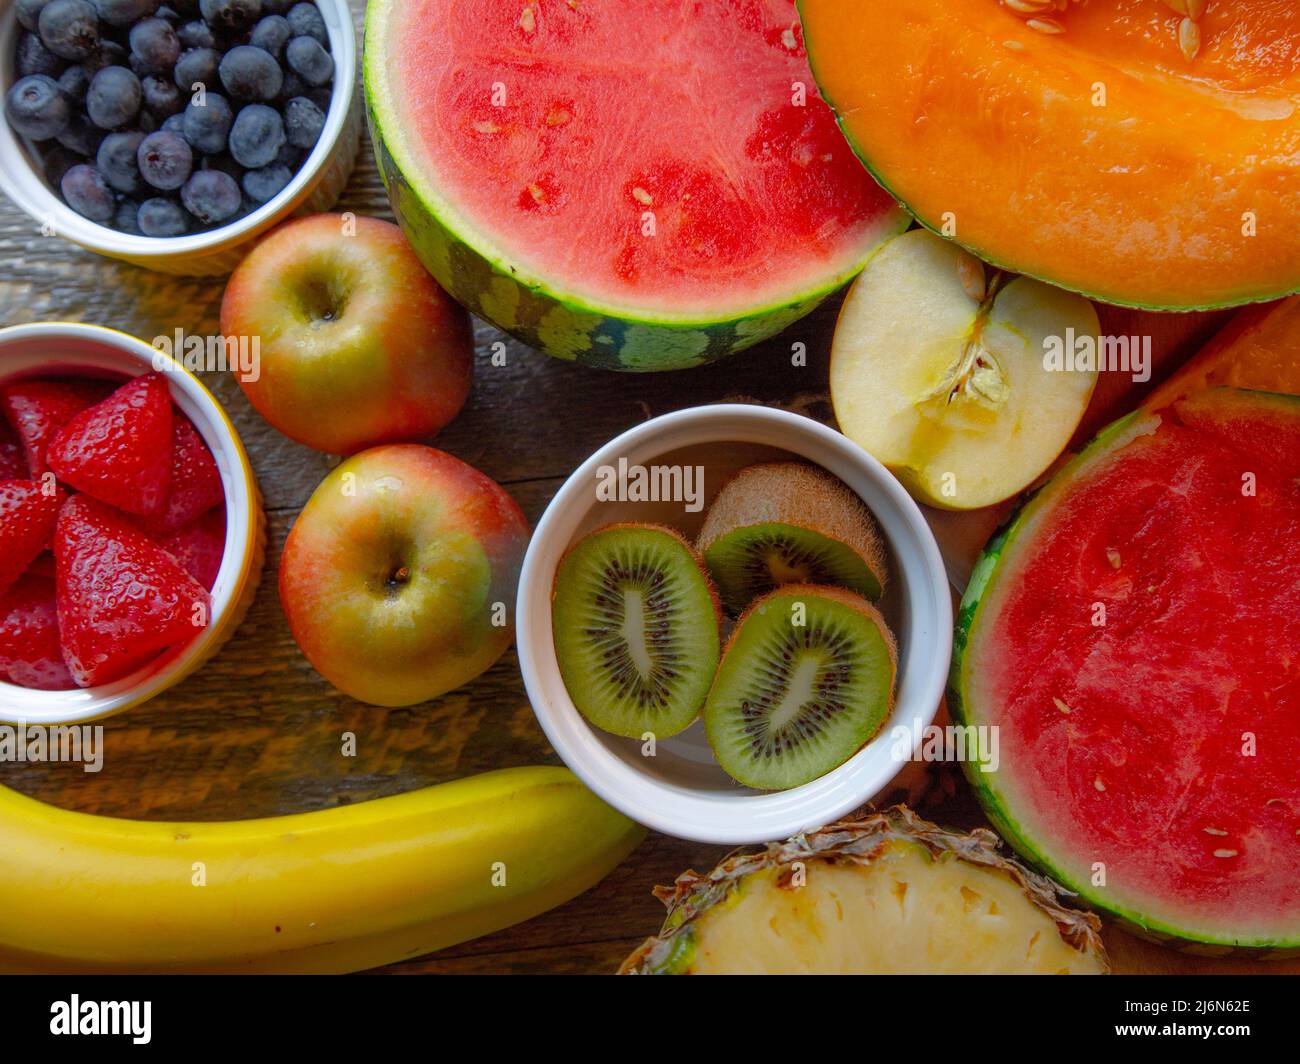 Top View of fresh cut fruit on natural wooden table. Stock Photo